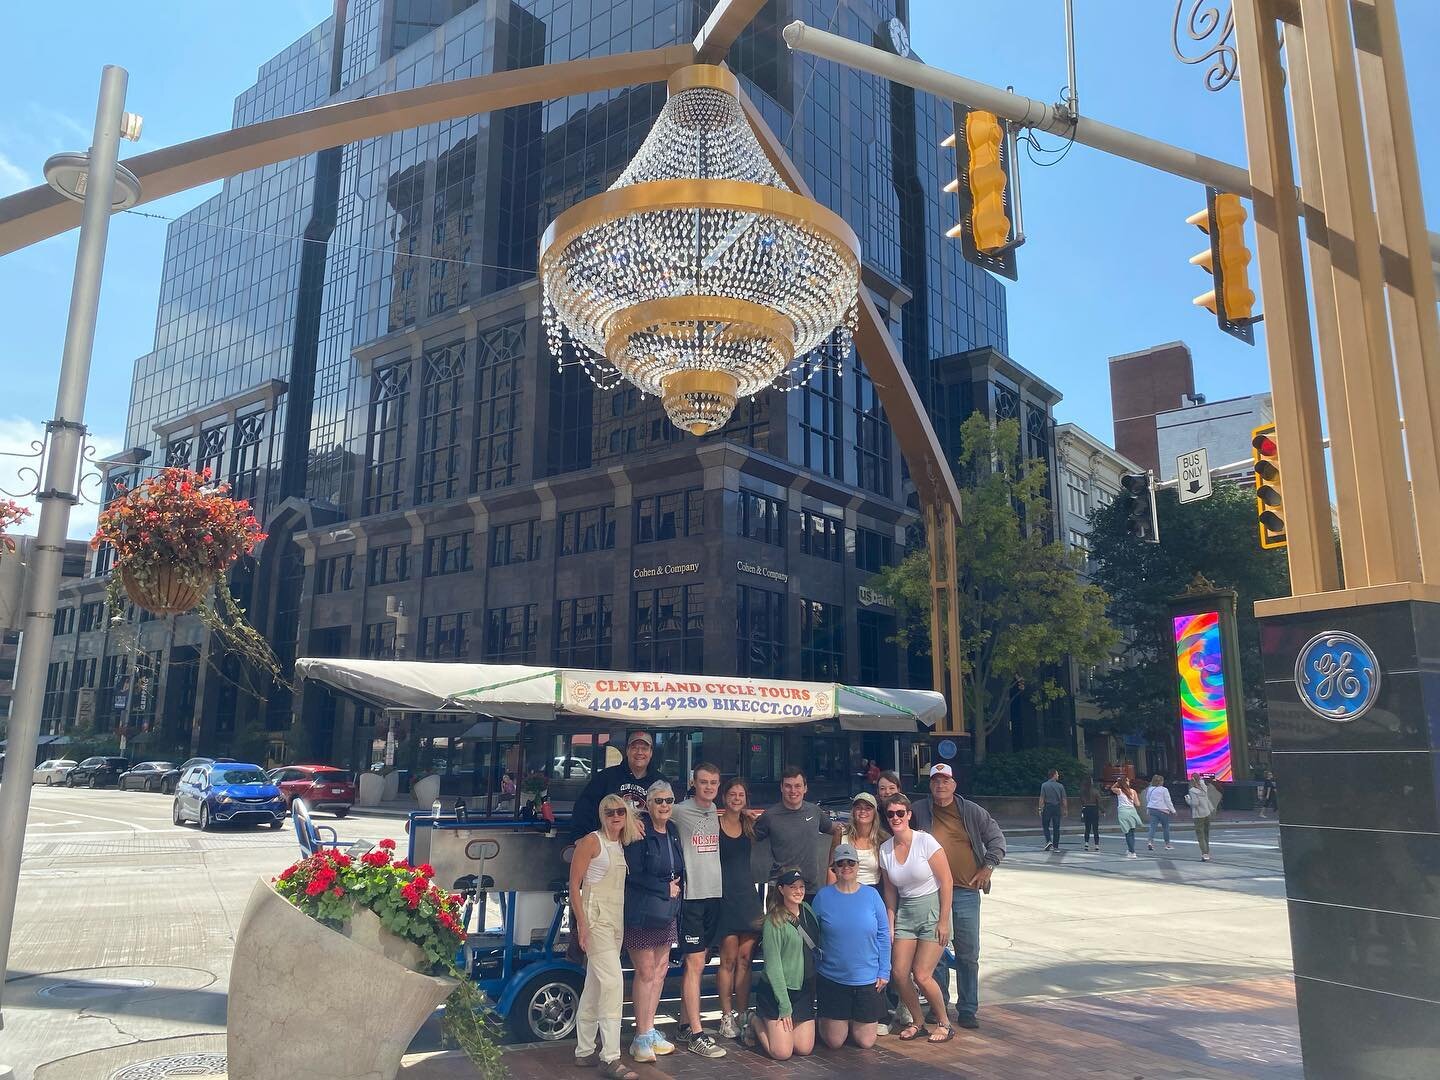 ✨HIGHLIGHTING✨our recent tour this past weekend that celebrated Grandma and Grandpa&rsquo;s 80th birthday (born 2 days apart and married over 60 years!)
.
.
This family outing made stops at the Chandelier in @psqdistrict, the breathtaking Rotunda ins